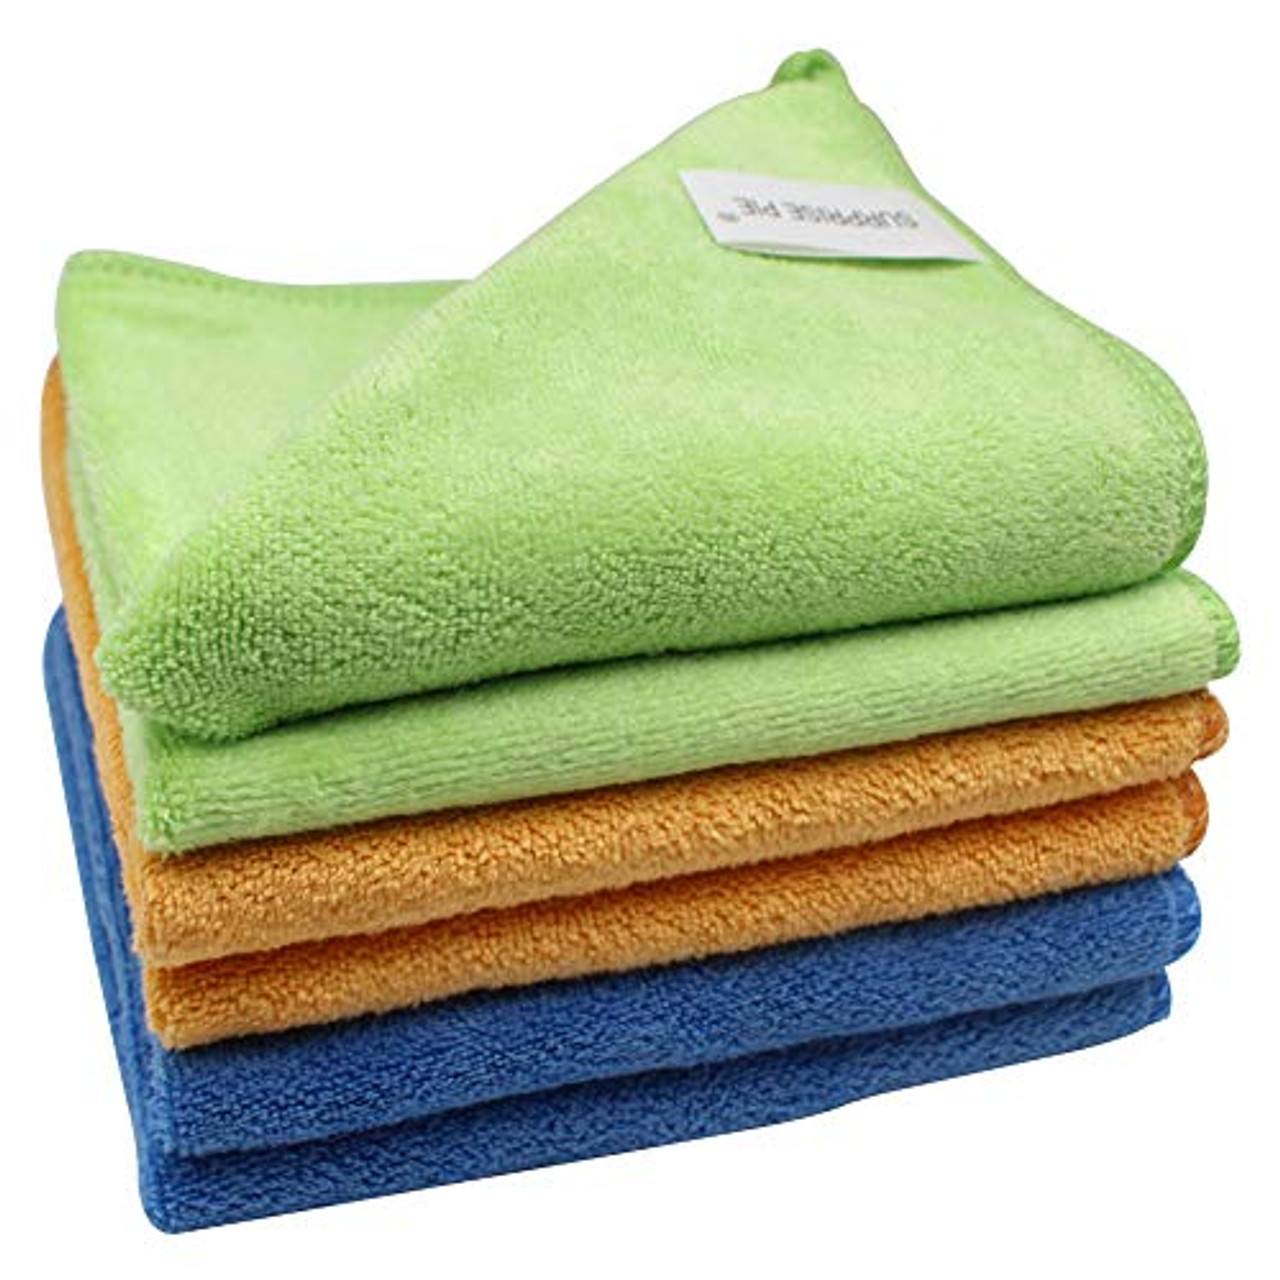 12x12 400GSM Microfiber Cleaning Cloth 6PCS 3 Colors(Green Blue Orange)  Reusable Wash Clothes for House Boat Car Window Cleaner 2PCS Screen Cloth  as Gift